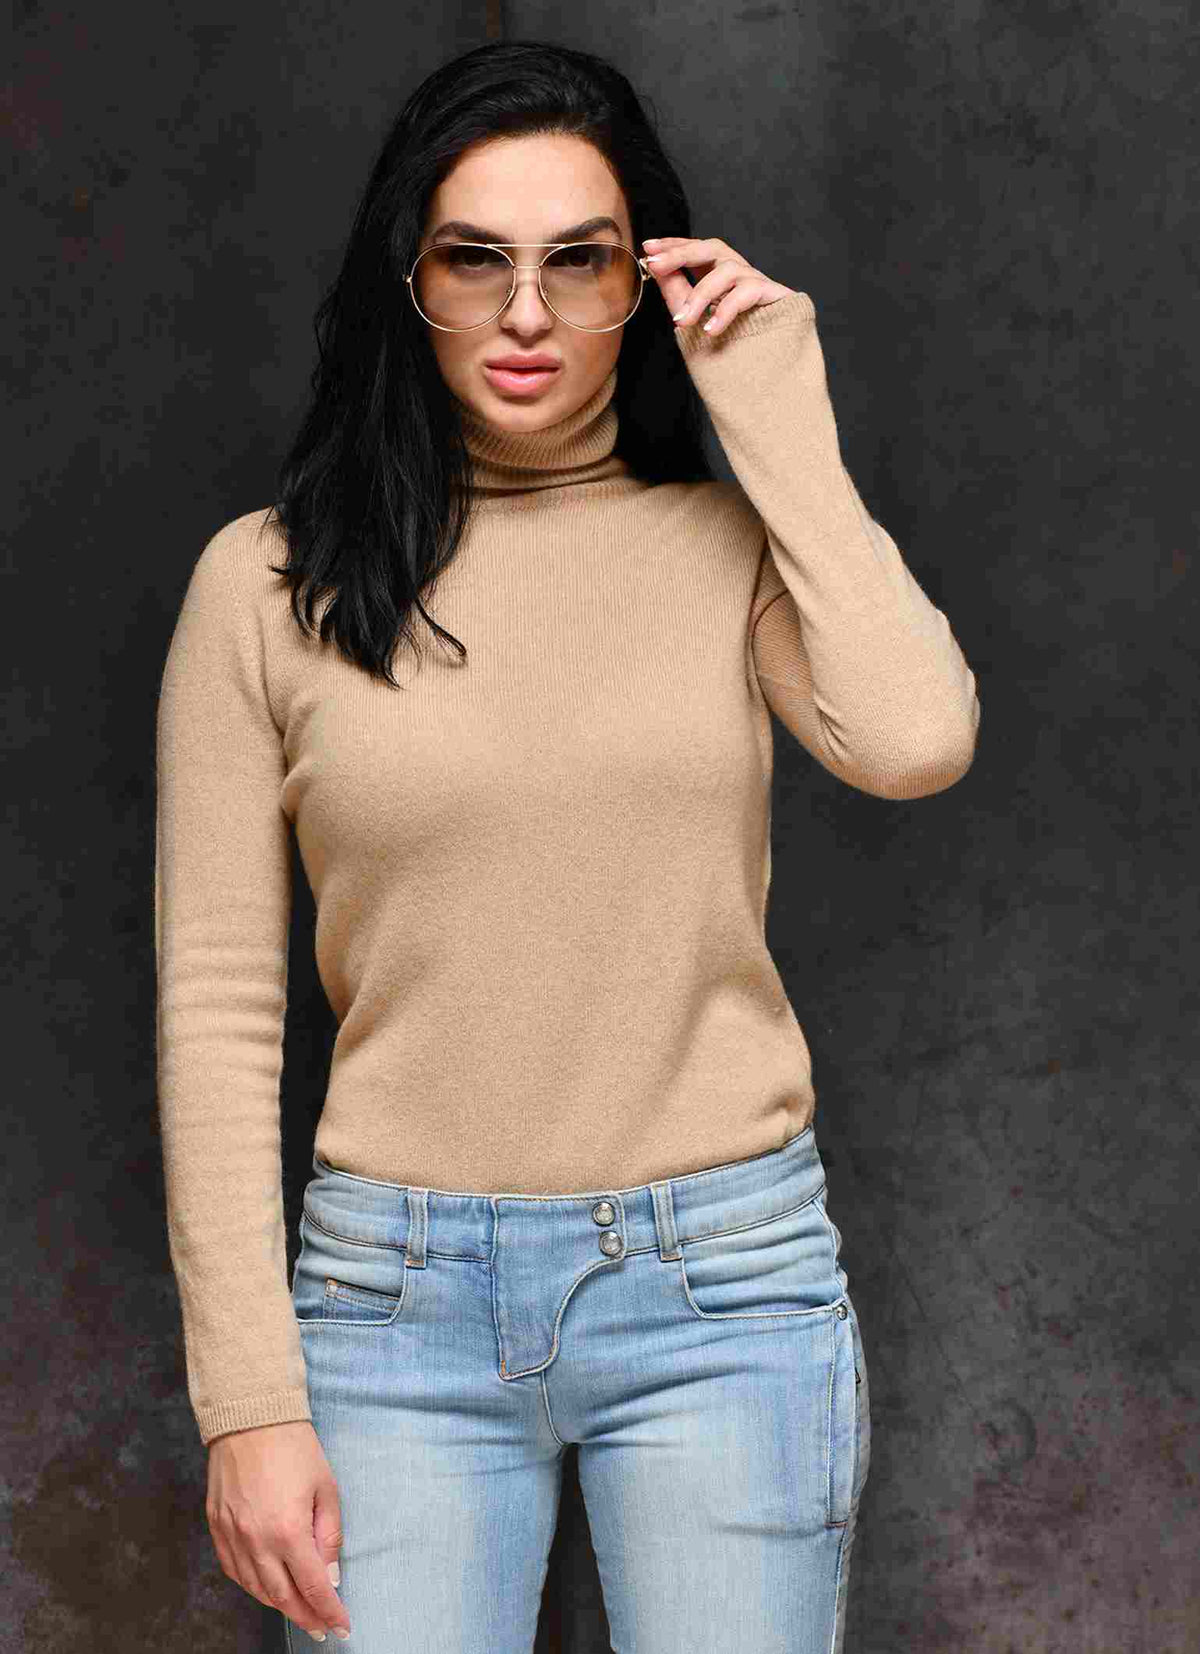 Women wearing Made in Italy Courmayeur cashmere turtleneck in color camel from Carmen Sol